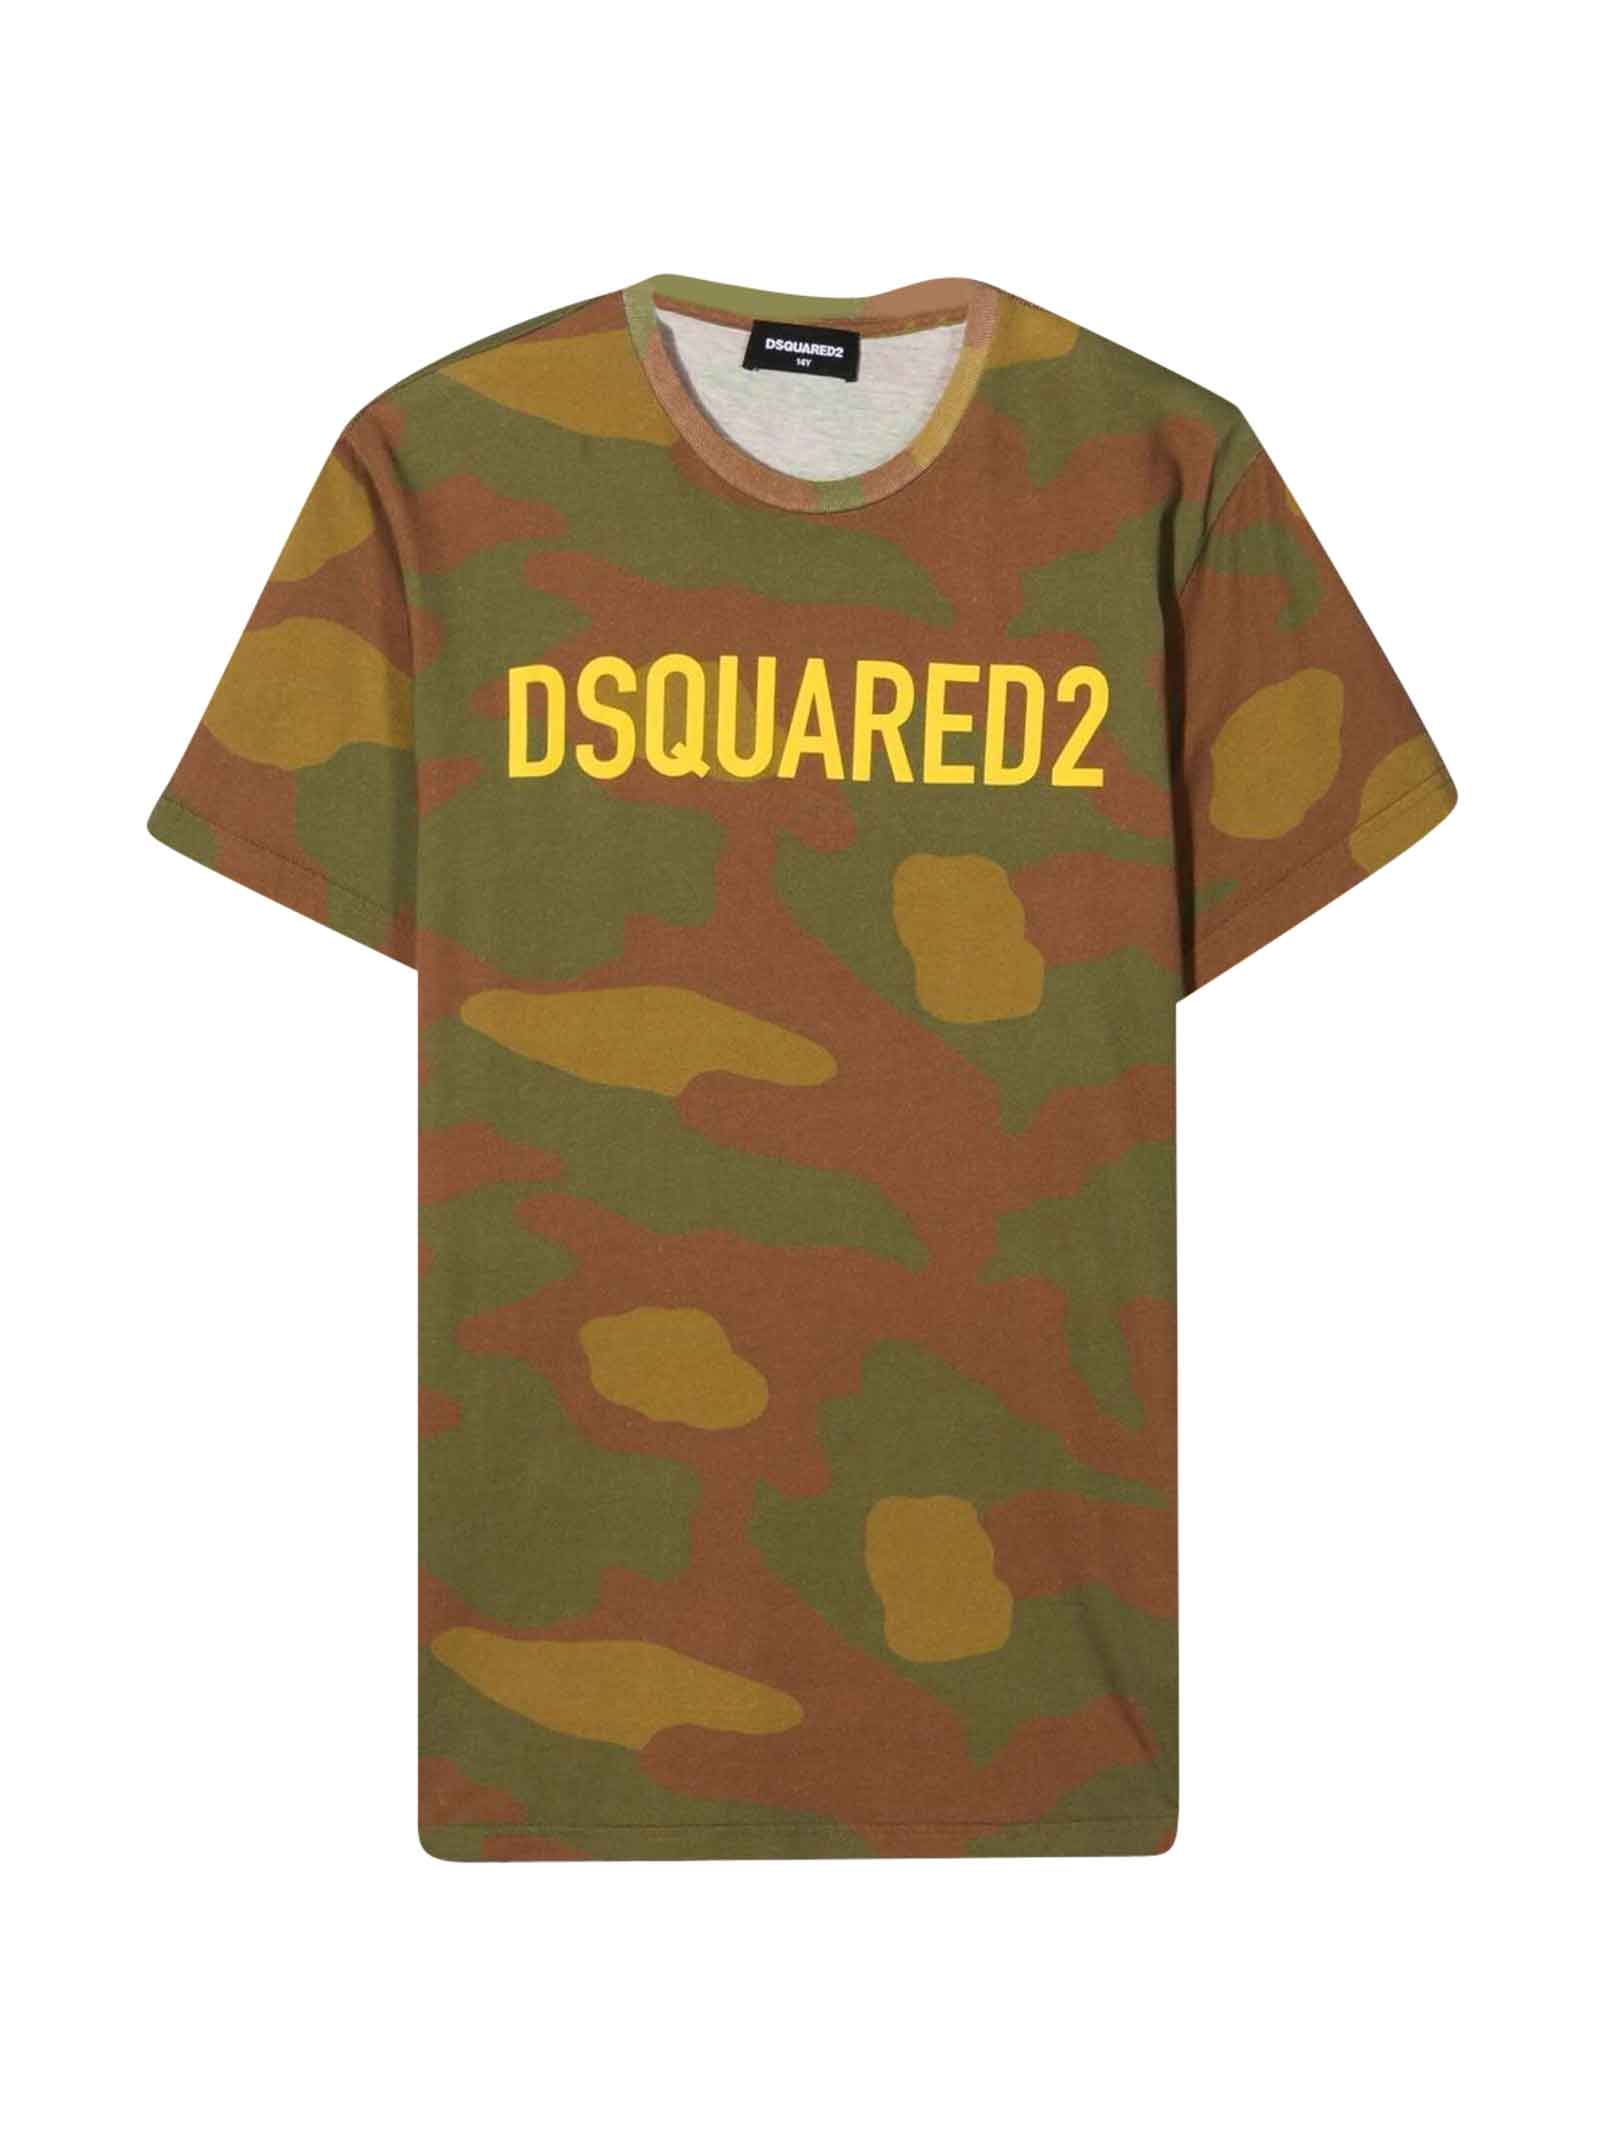 Dsquared2 Military T-shirt Unisex Teen